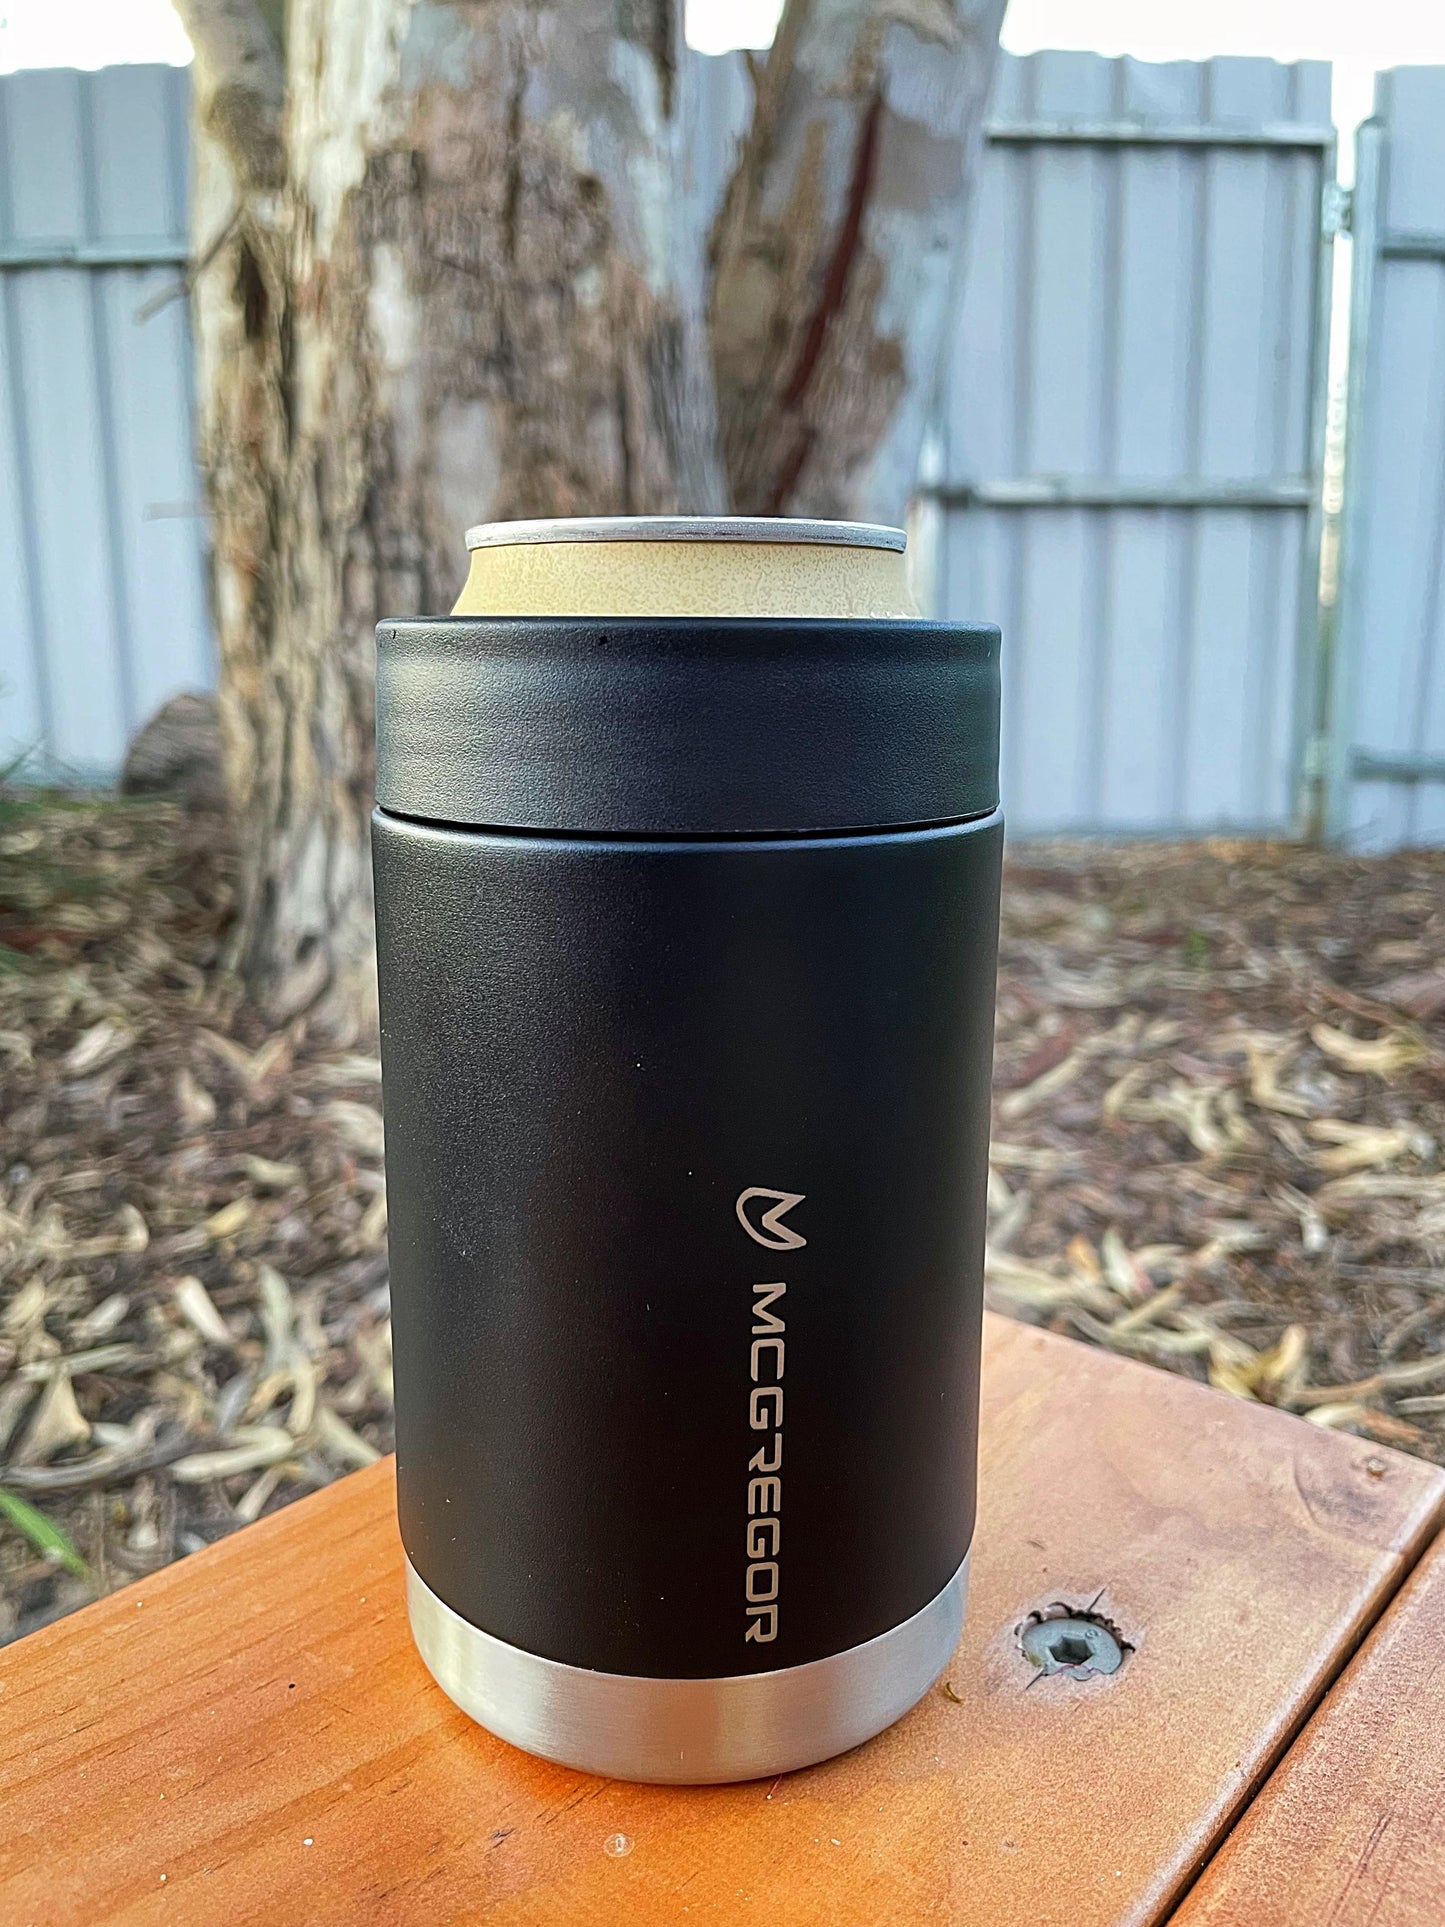 PERSONALLY ENGRAVED - Insulated Can Cooler/stubby holder or Waterbottle